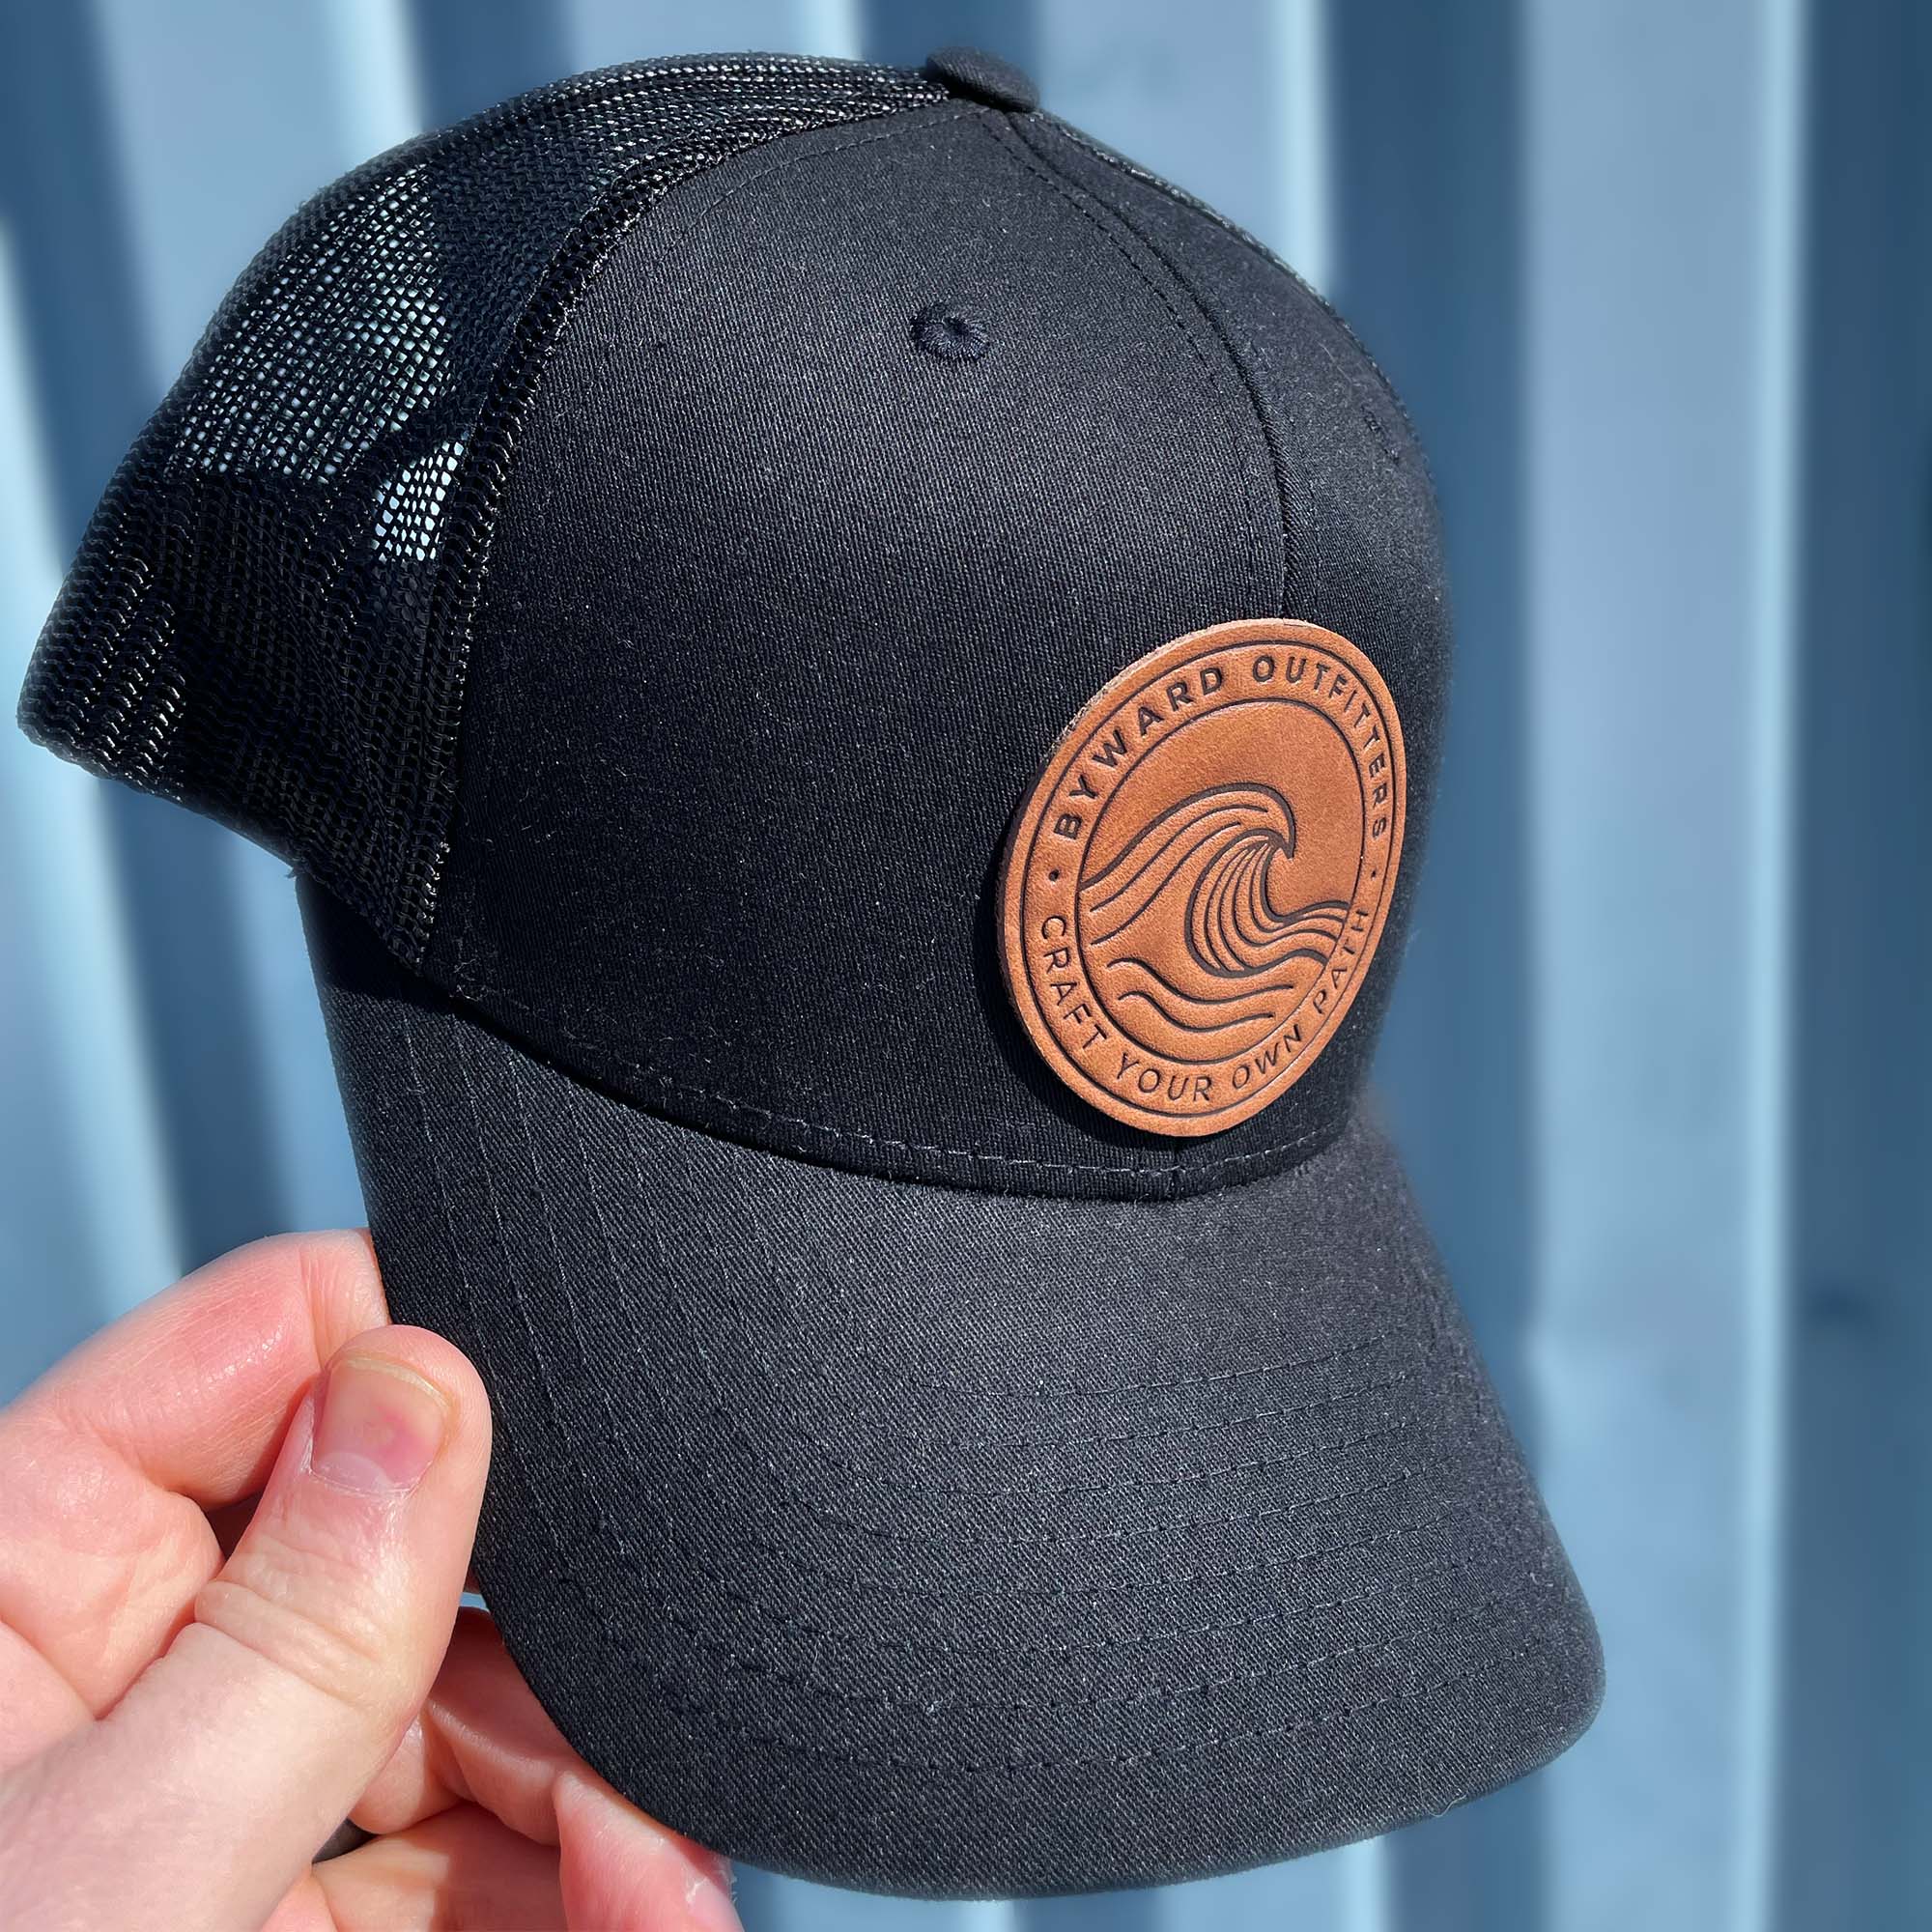 Black trucker hat with full-grain leather patch of a Rolling Wave | BLACK-005-003, CHARC-005-003, NAVY-005-003, HGREY-005-003, MOSS-005-003, BROWN-005-003